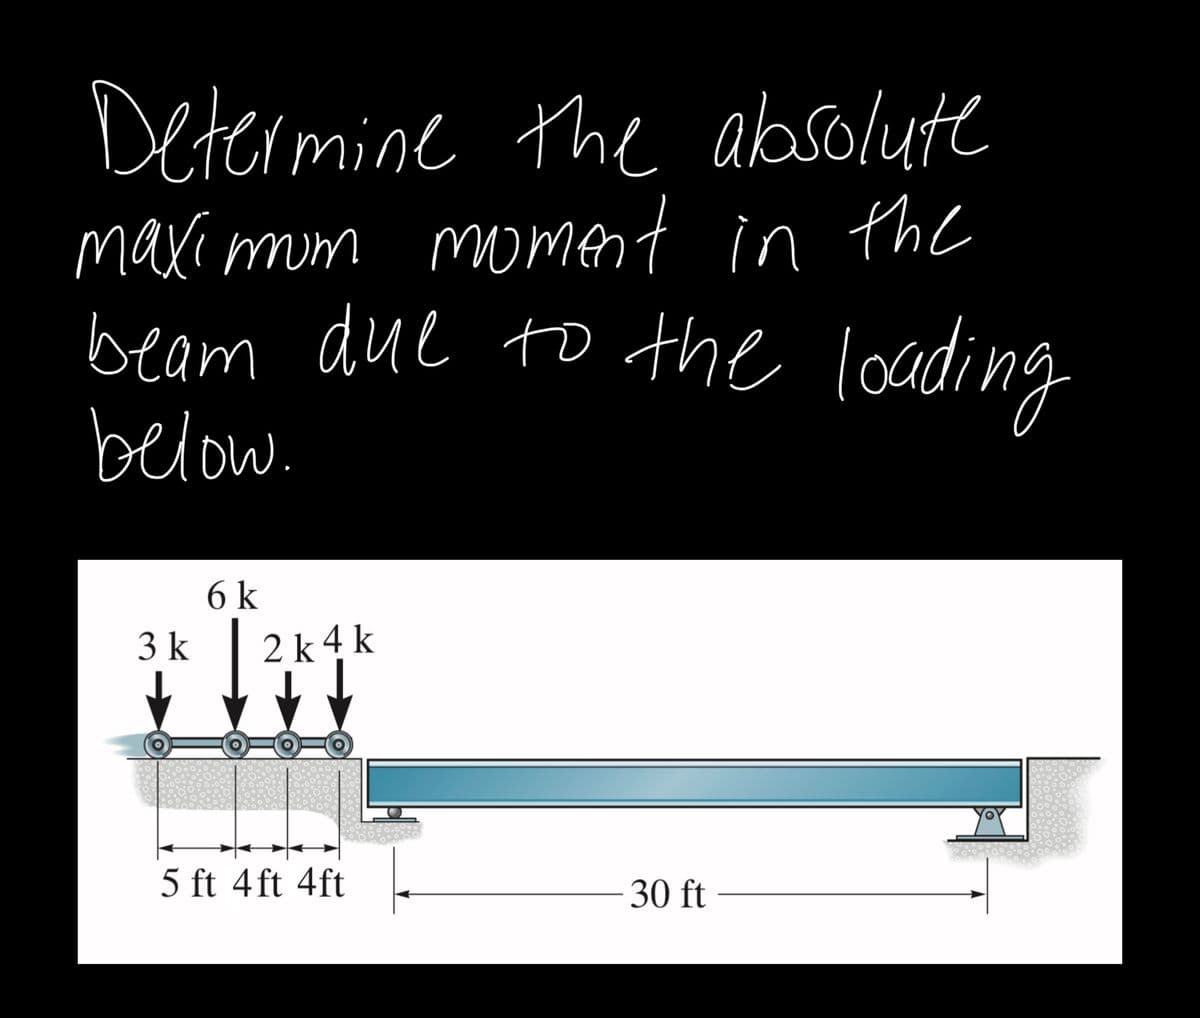 Determine the absolute
maxi mum moment in the
beam due to the loading
below.
loetin
6k
3 k
2 k 4 k
5 ft 4 ft 4ft
30 ft
